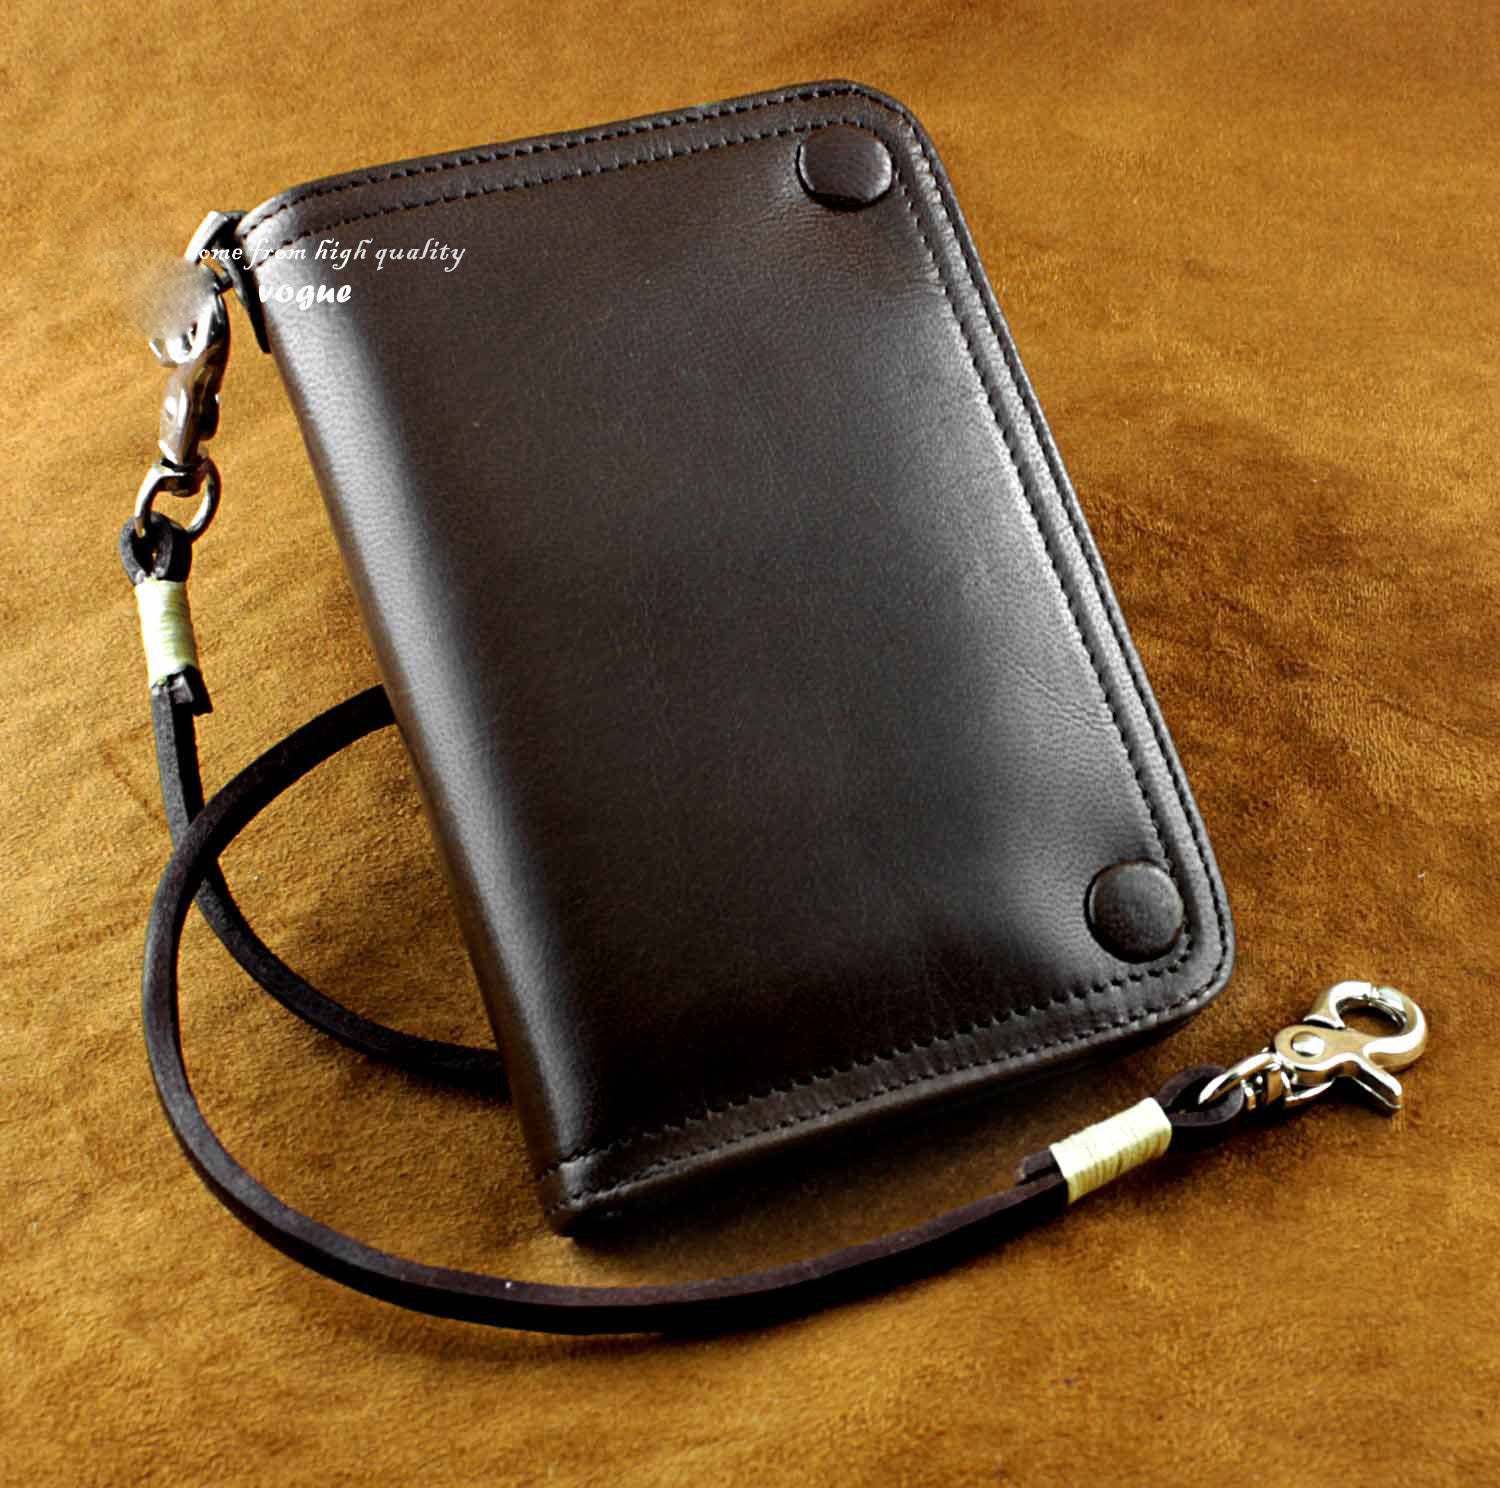 Cool Leather Men's Small Biker Chain Wallet Biker Wallet Wallet With Chain For Men - iwalletsmen